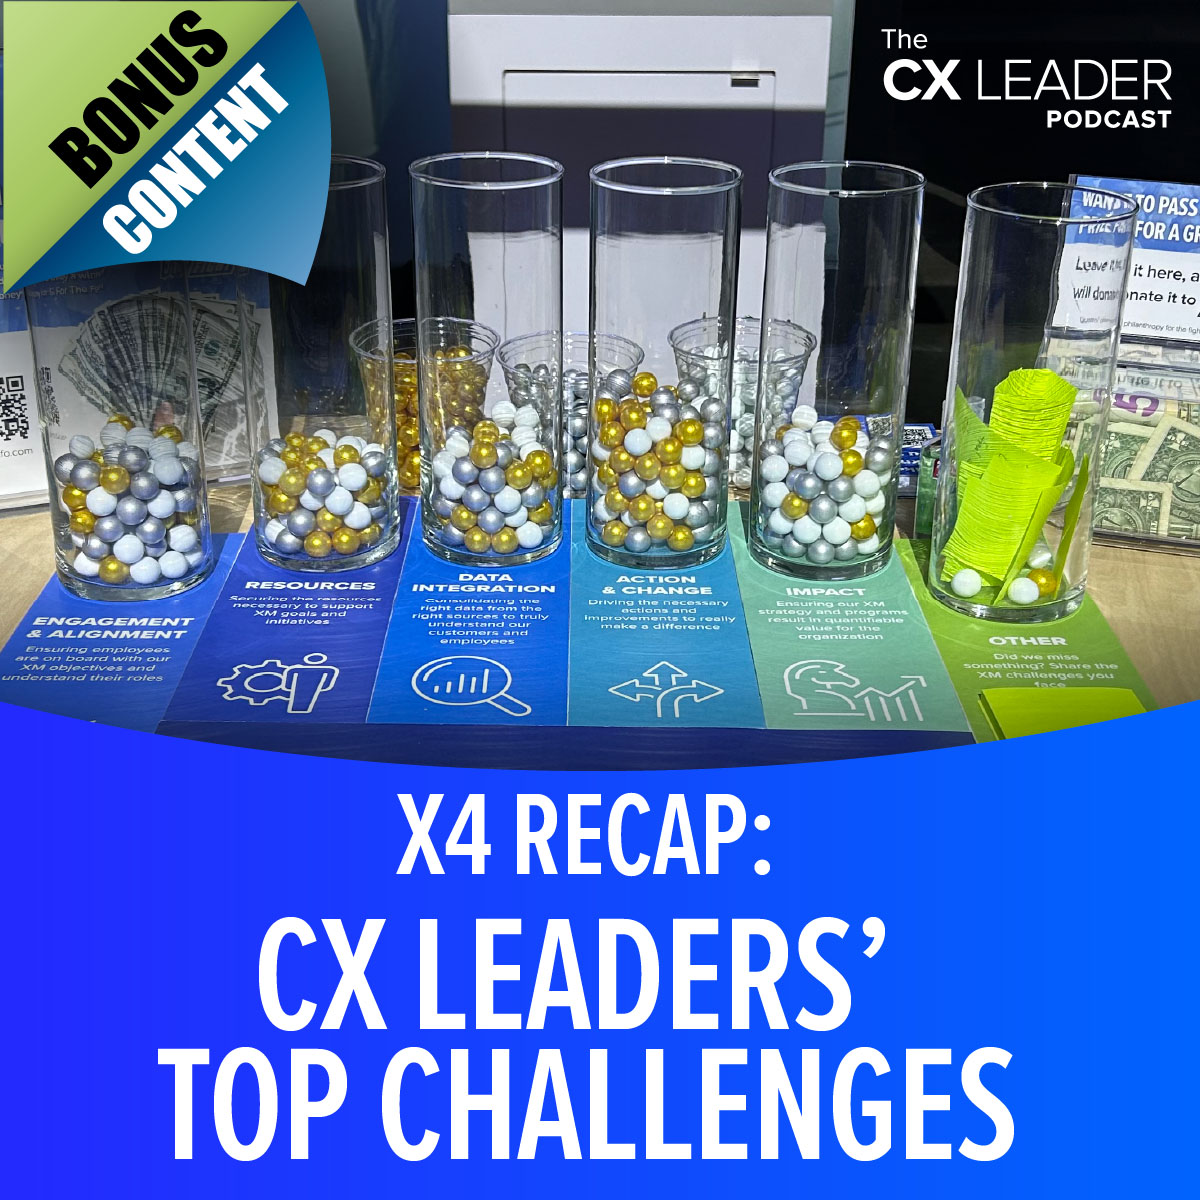 Bonus: We Asked CX Leaders at X4 About Their Top XM Challenges